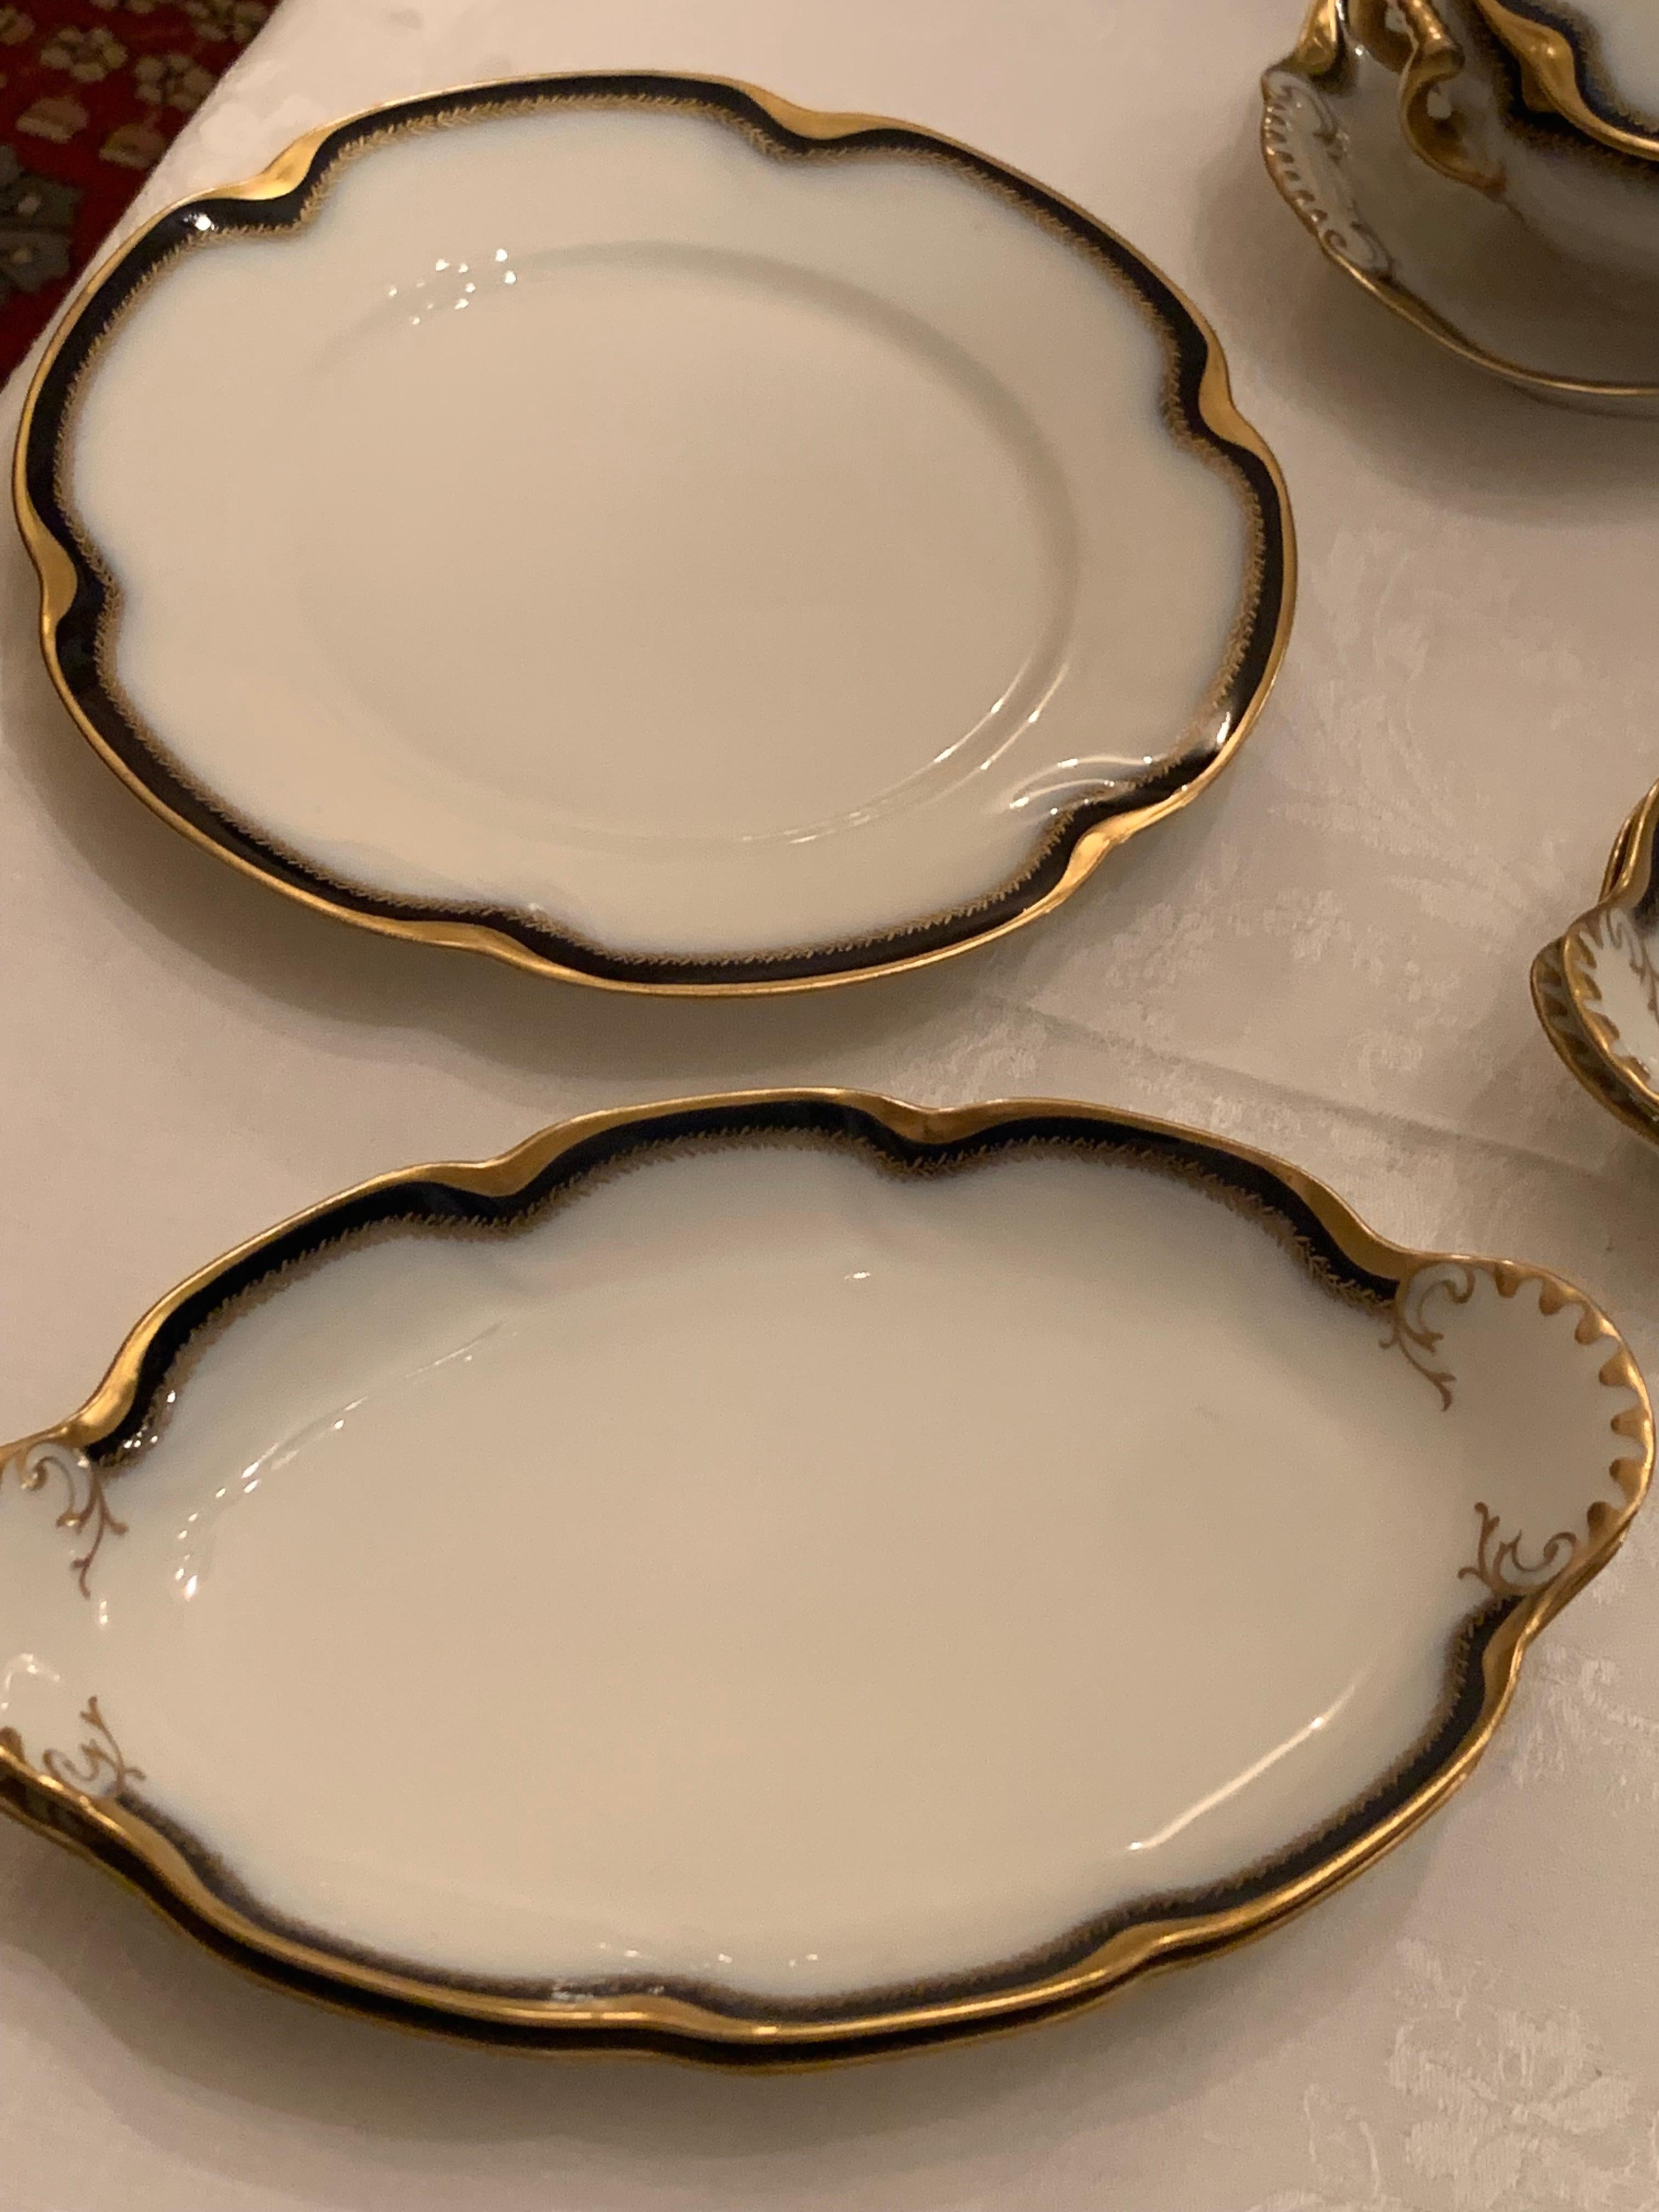 Dinner set limoges porcelain by Theodore Haviland In Good Condition For Sale In Los Angeles, CA